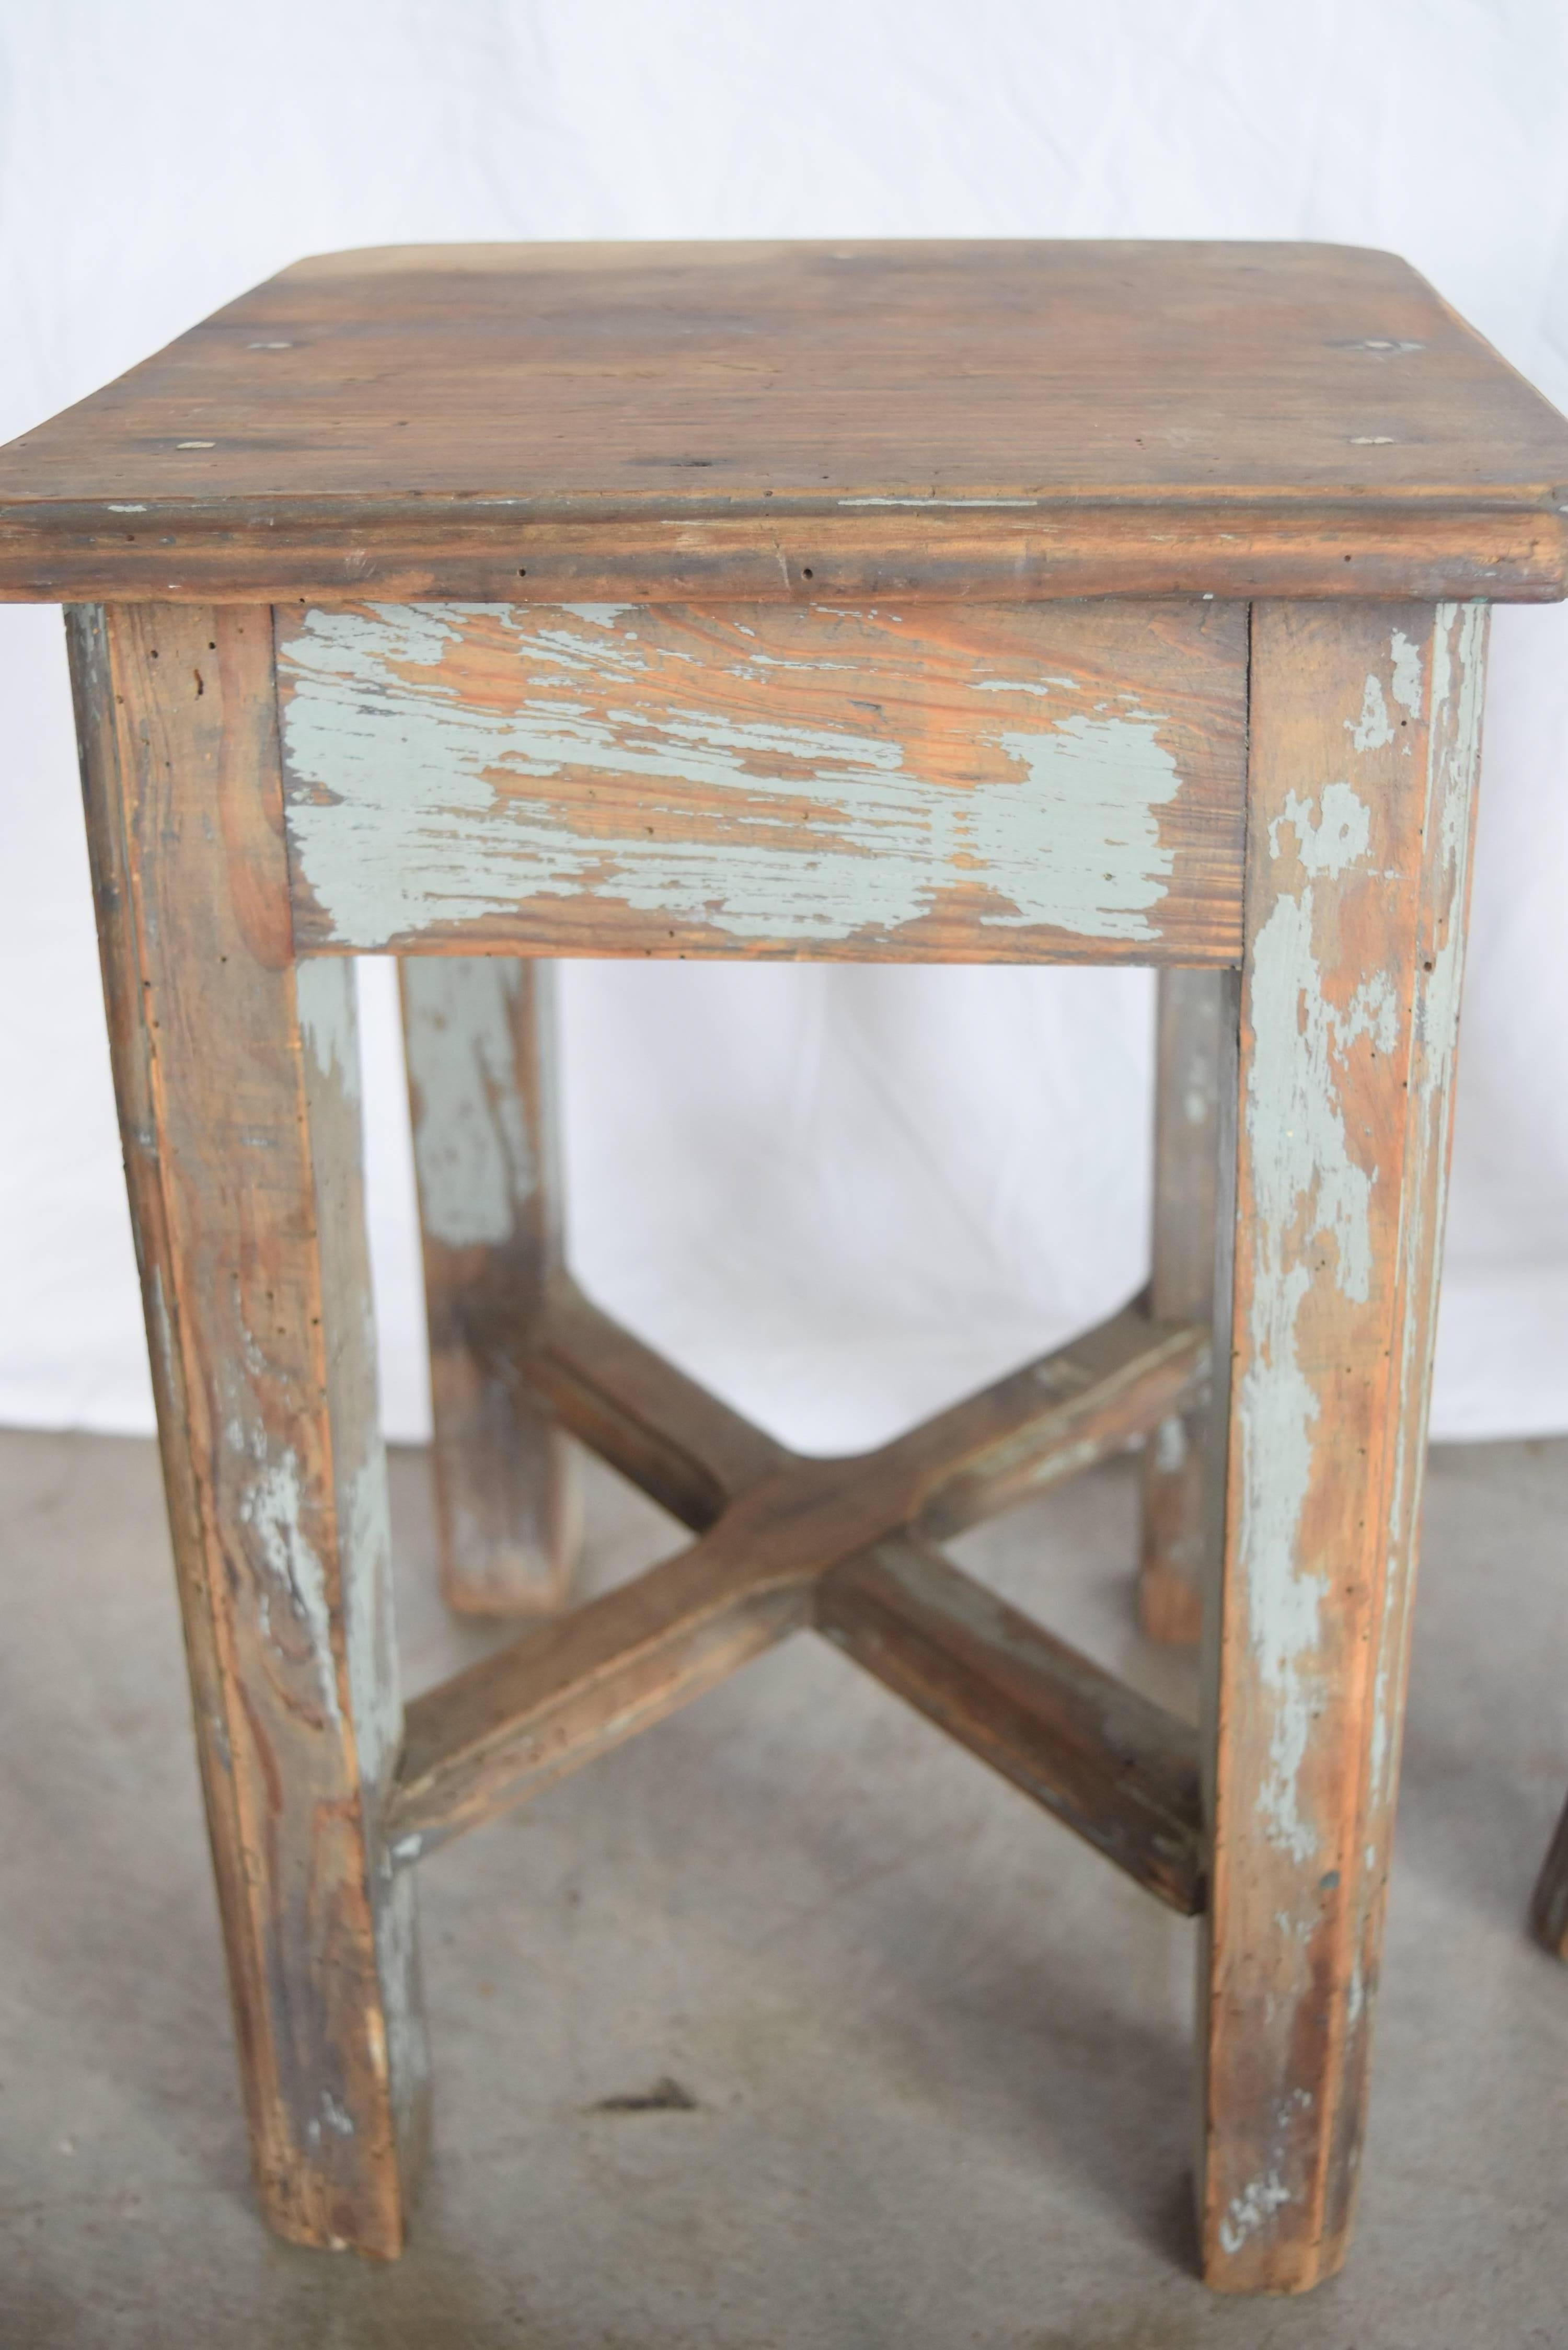 These stools are rustic and adorable with the old paint intact.   They originated in France and are perfect to use as a little side table or stool.  One of them has worn more than the others so it isn't level.  Please see photo...